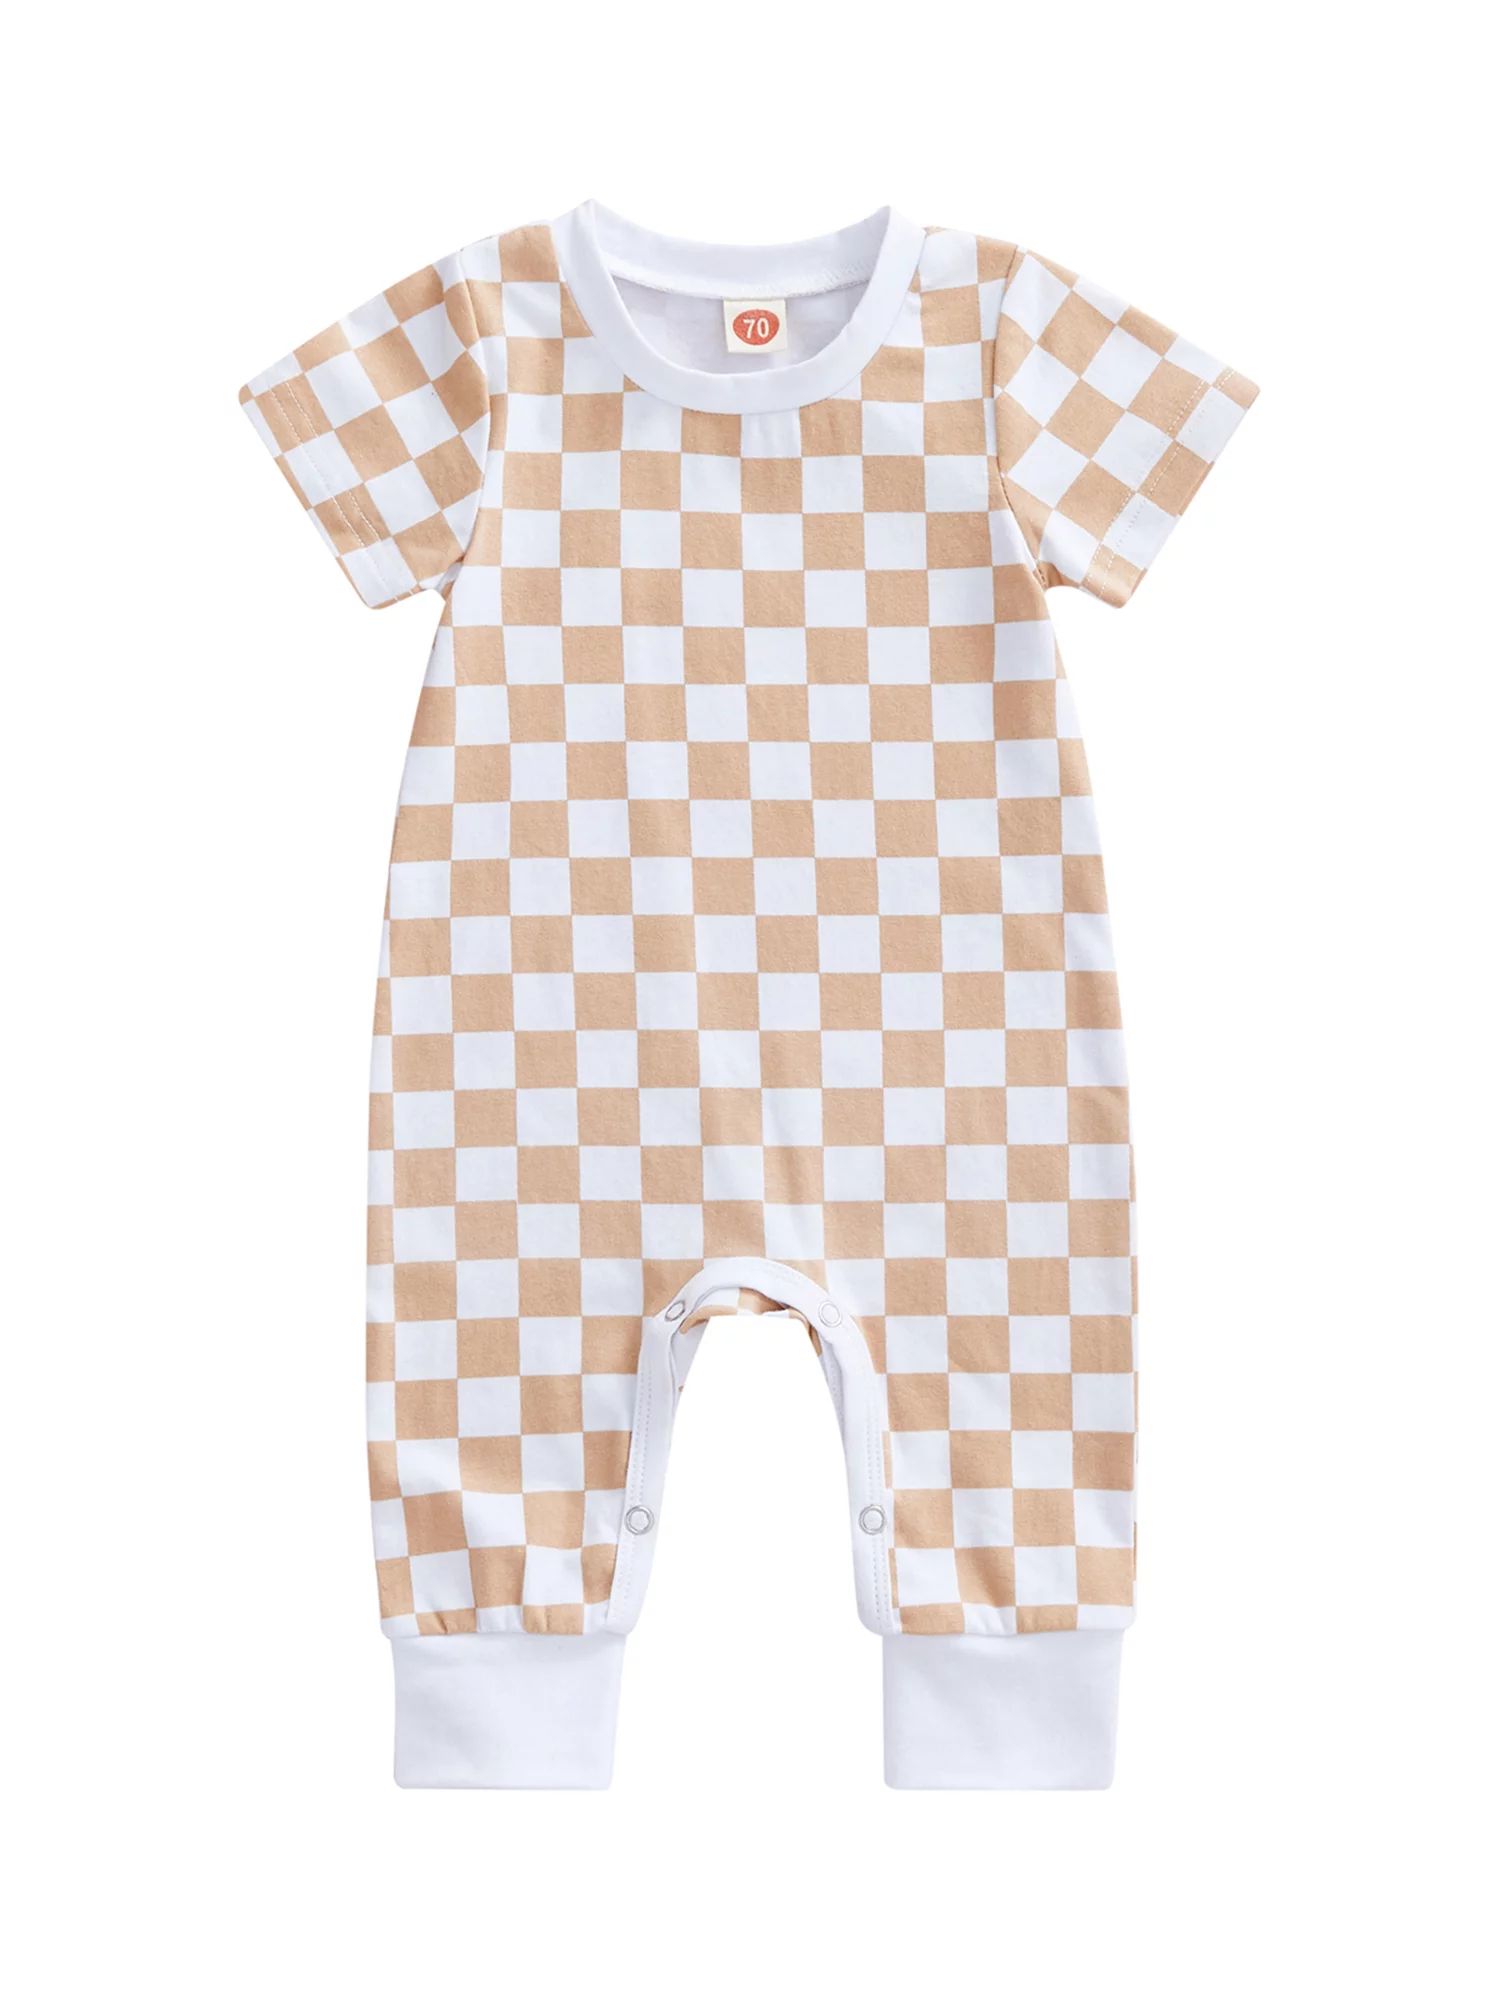 Eyicmarn Baby’s Casual Short Sleeve Jumpsuit Fashion Checkerboard Printed Round Neck Long Rompe... | Walmart (US)